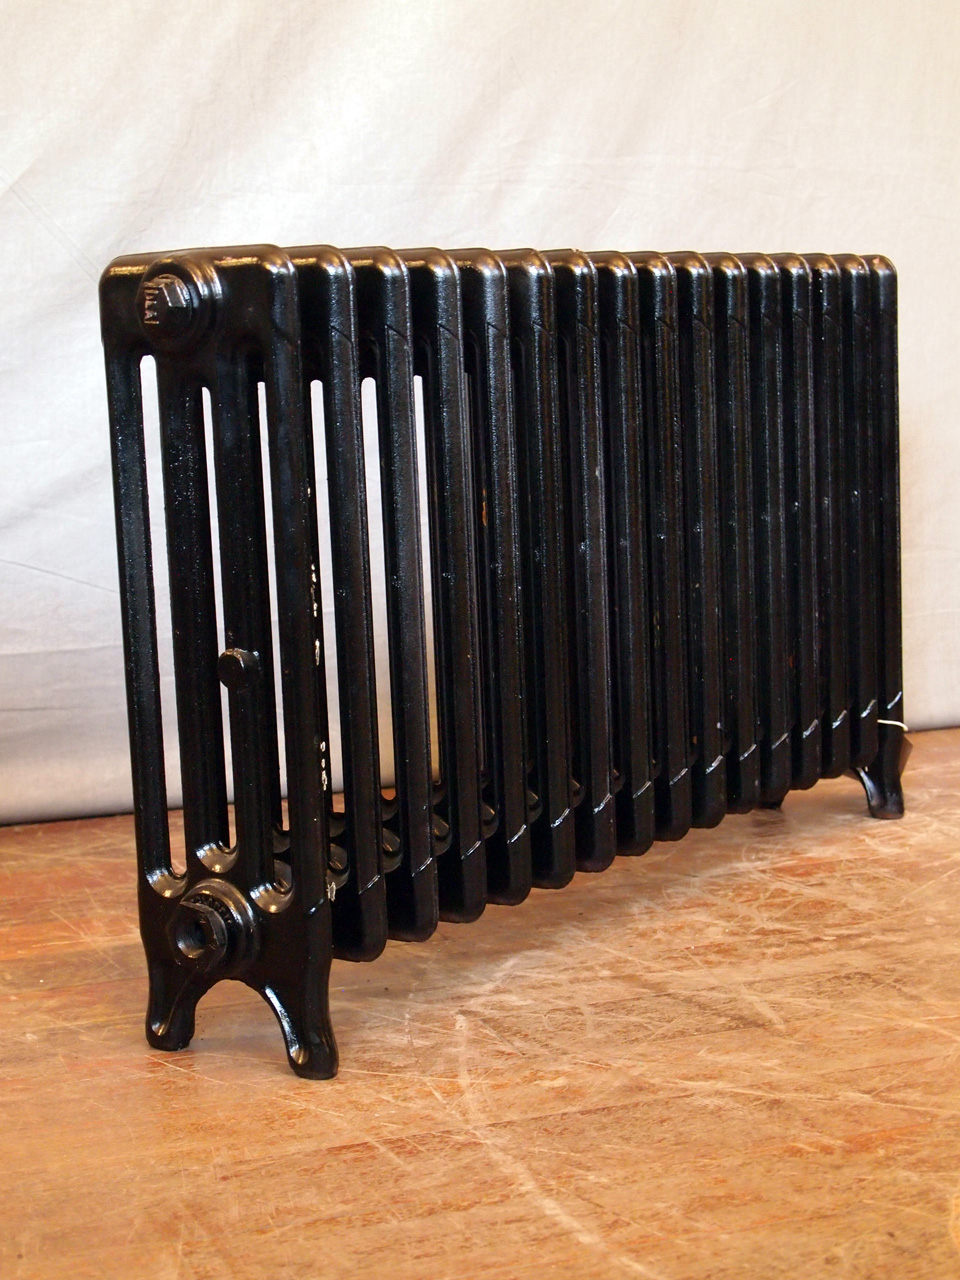 The 4 Column Radiator – from £28 per section